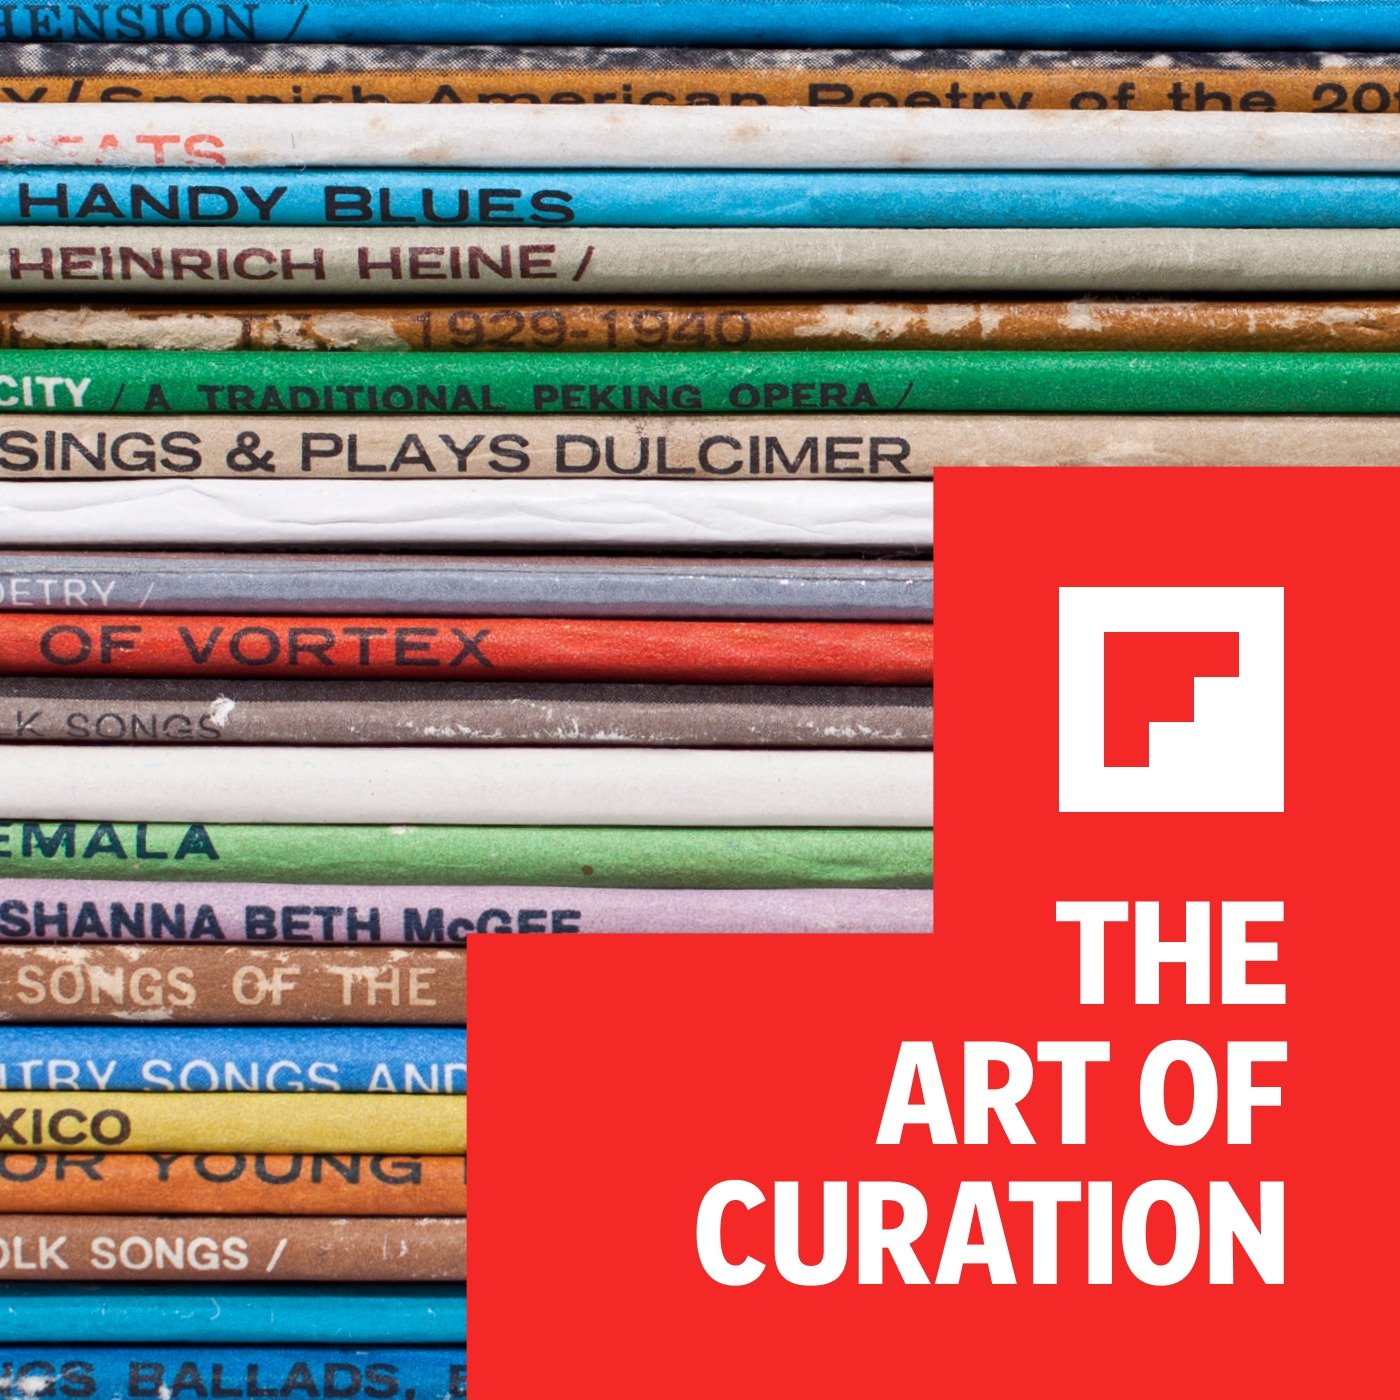 The Art of Curation